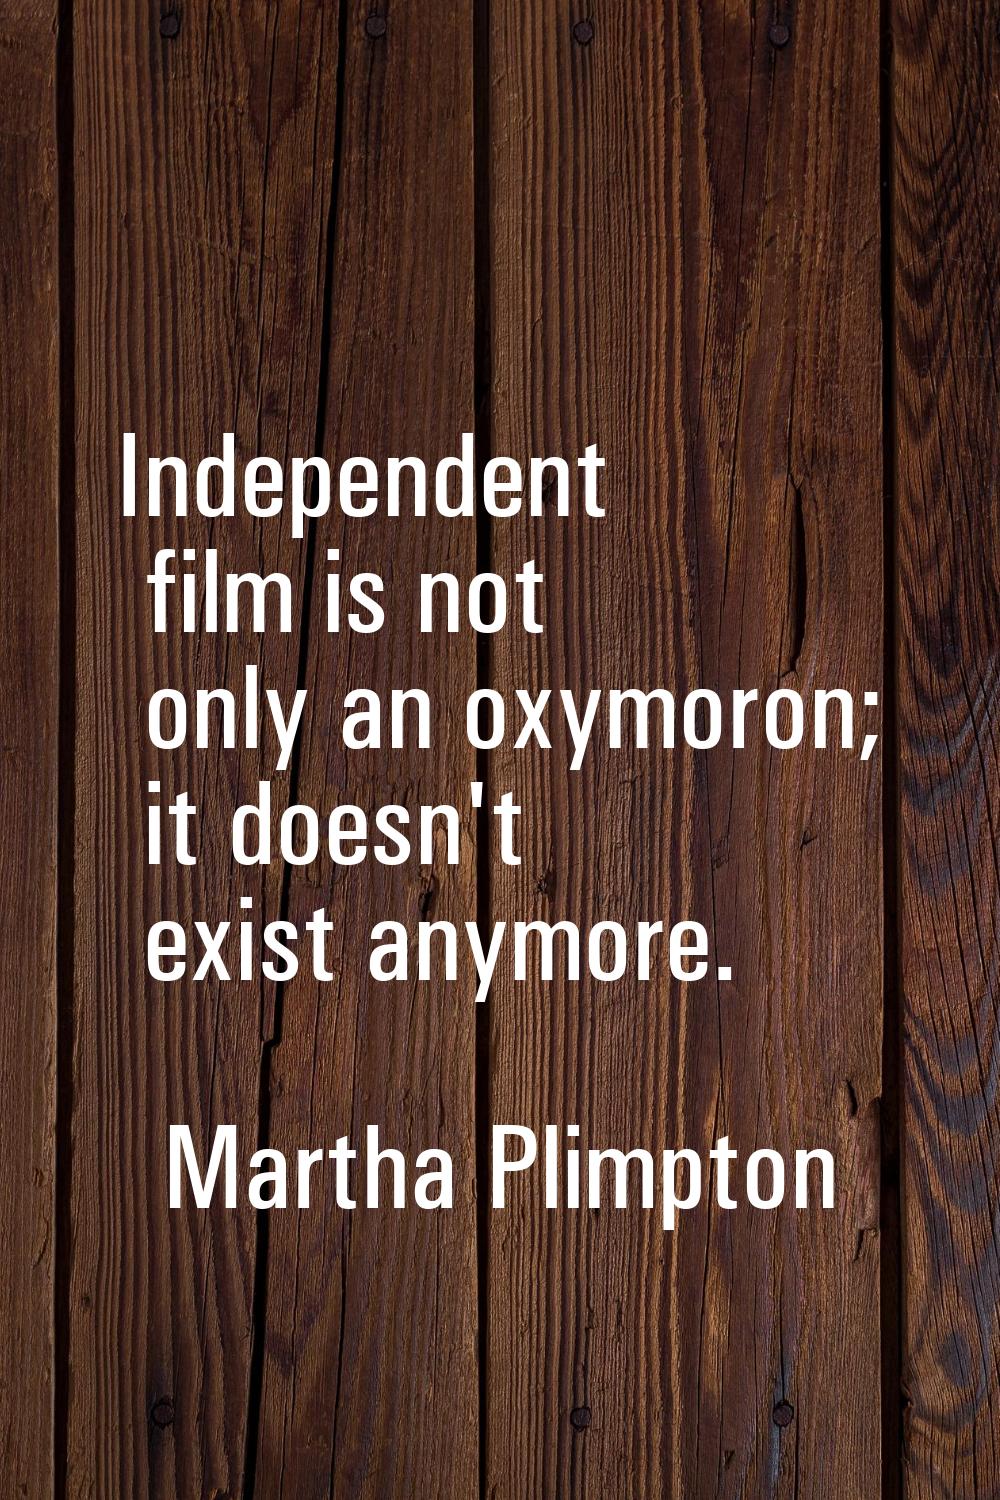 Independent film is not only an oxymoron; it doesn't exist anymore.